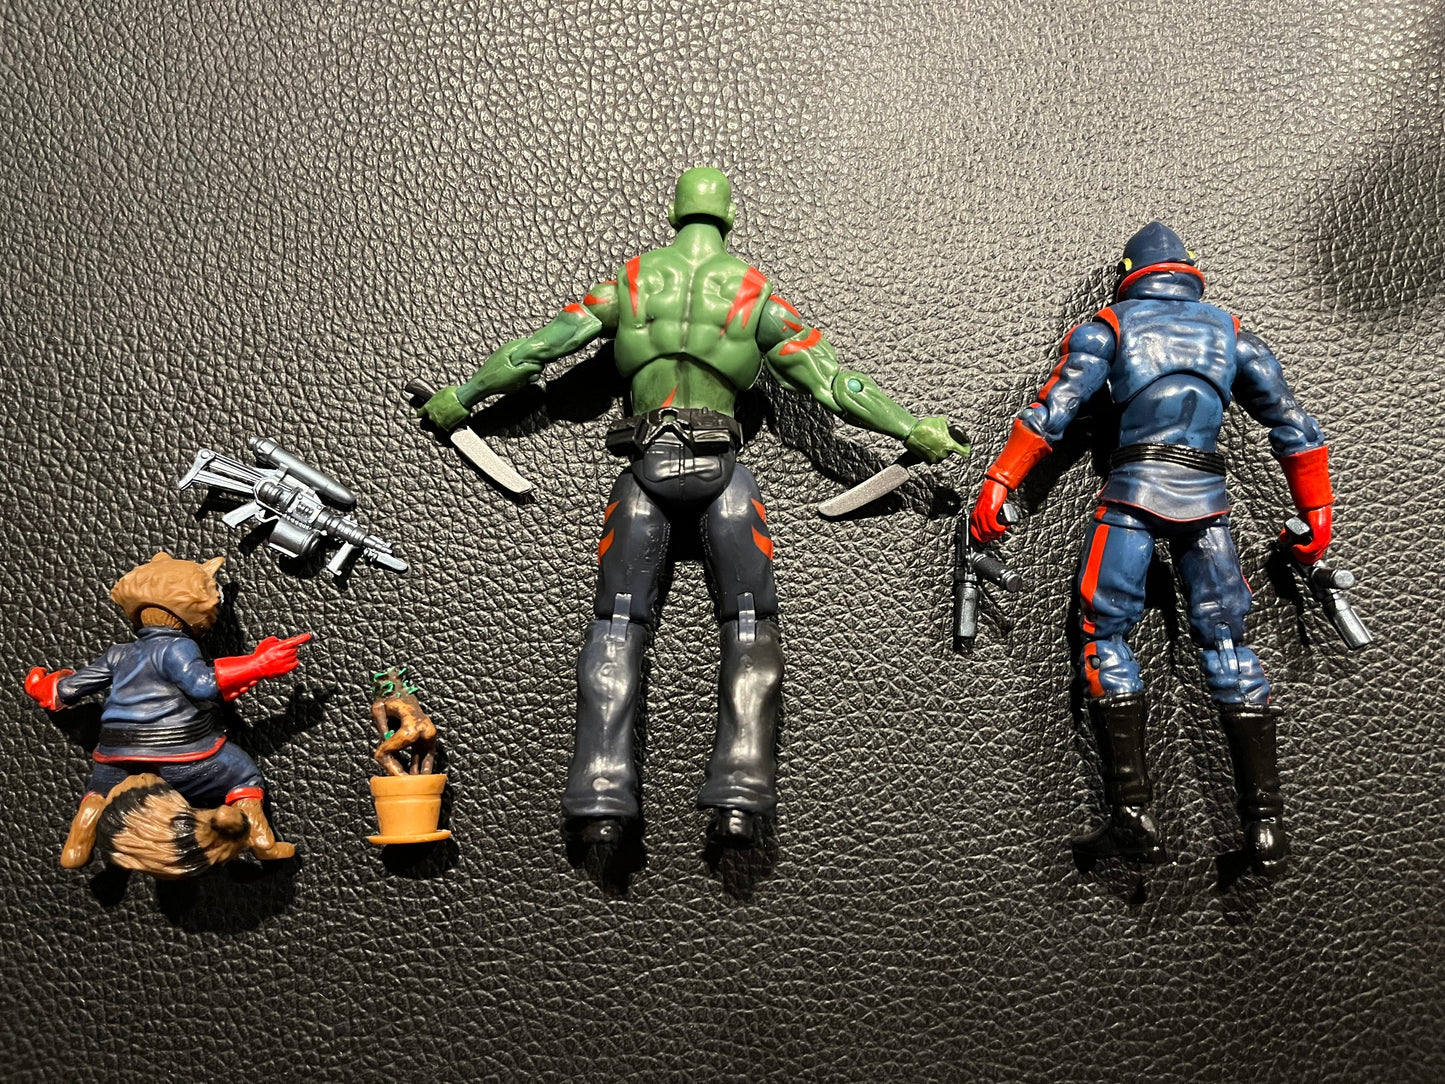 Starlord, Drax, Rocket Racoon (Guardians of the Galaxy) Marvel Universe 3.75 3 pack